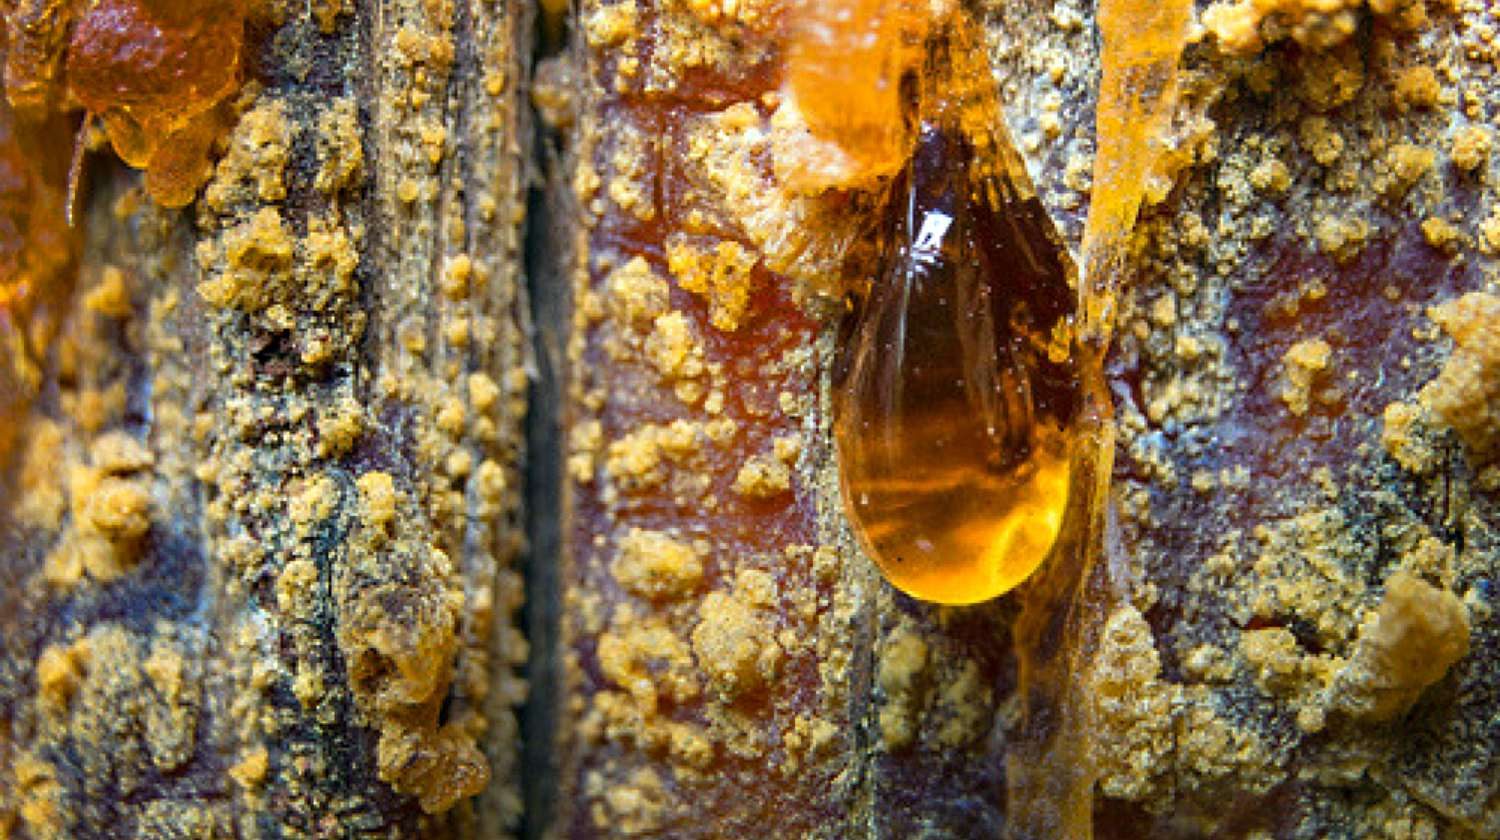 7 Survival Uses Of Pine Resin You Need To Know | Survival Life